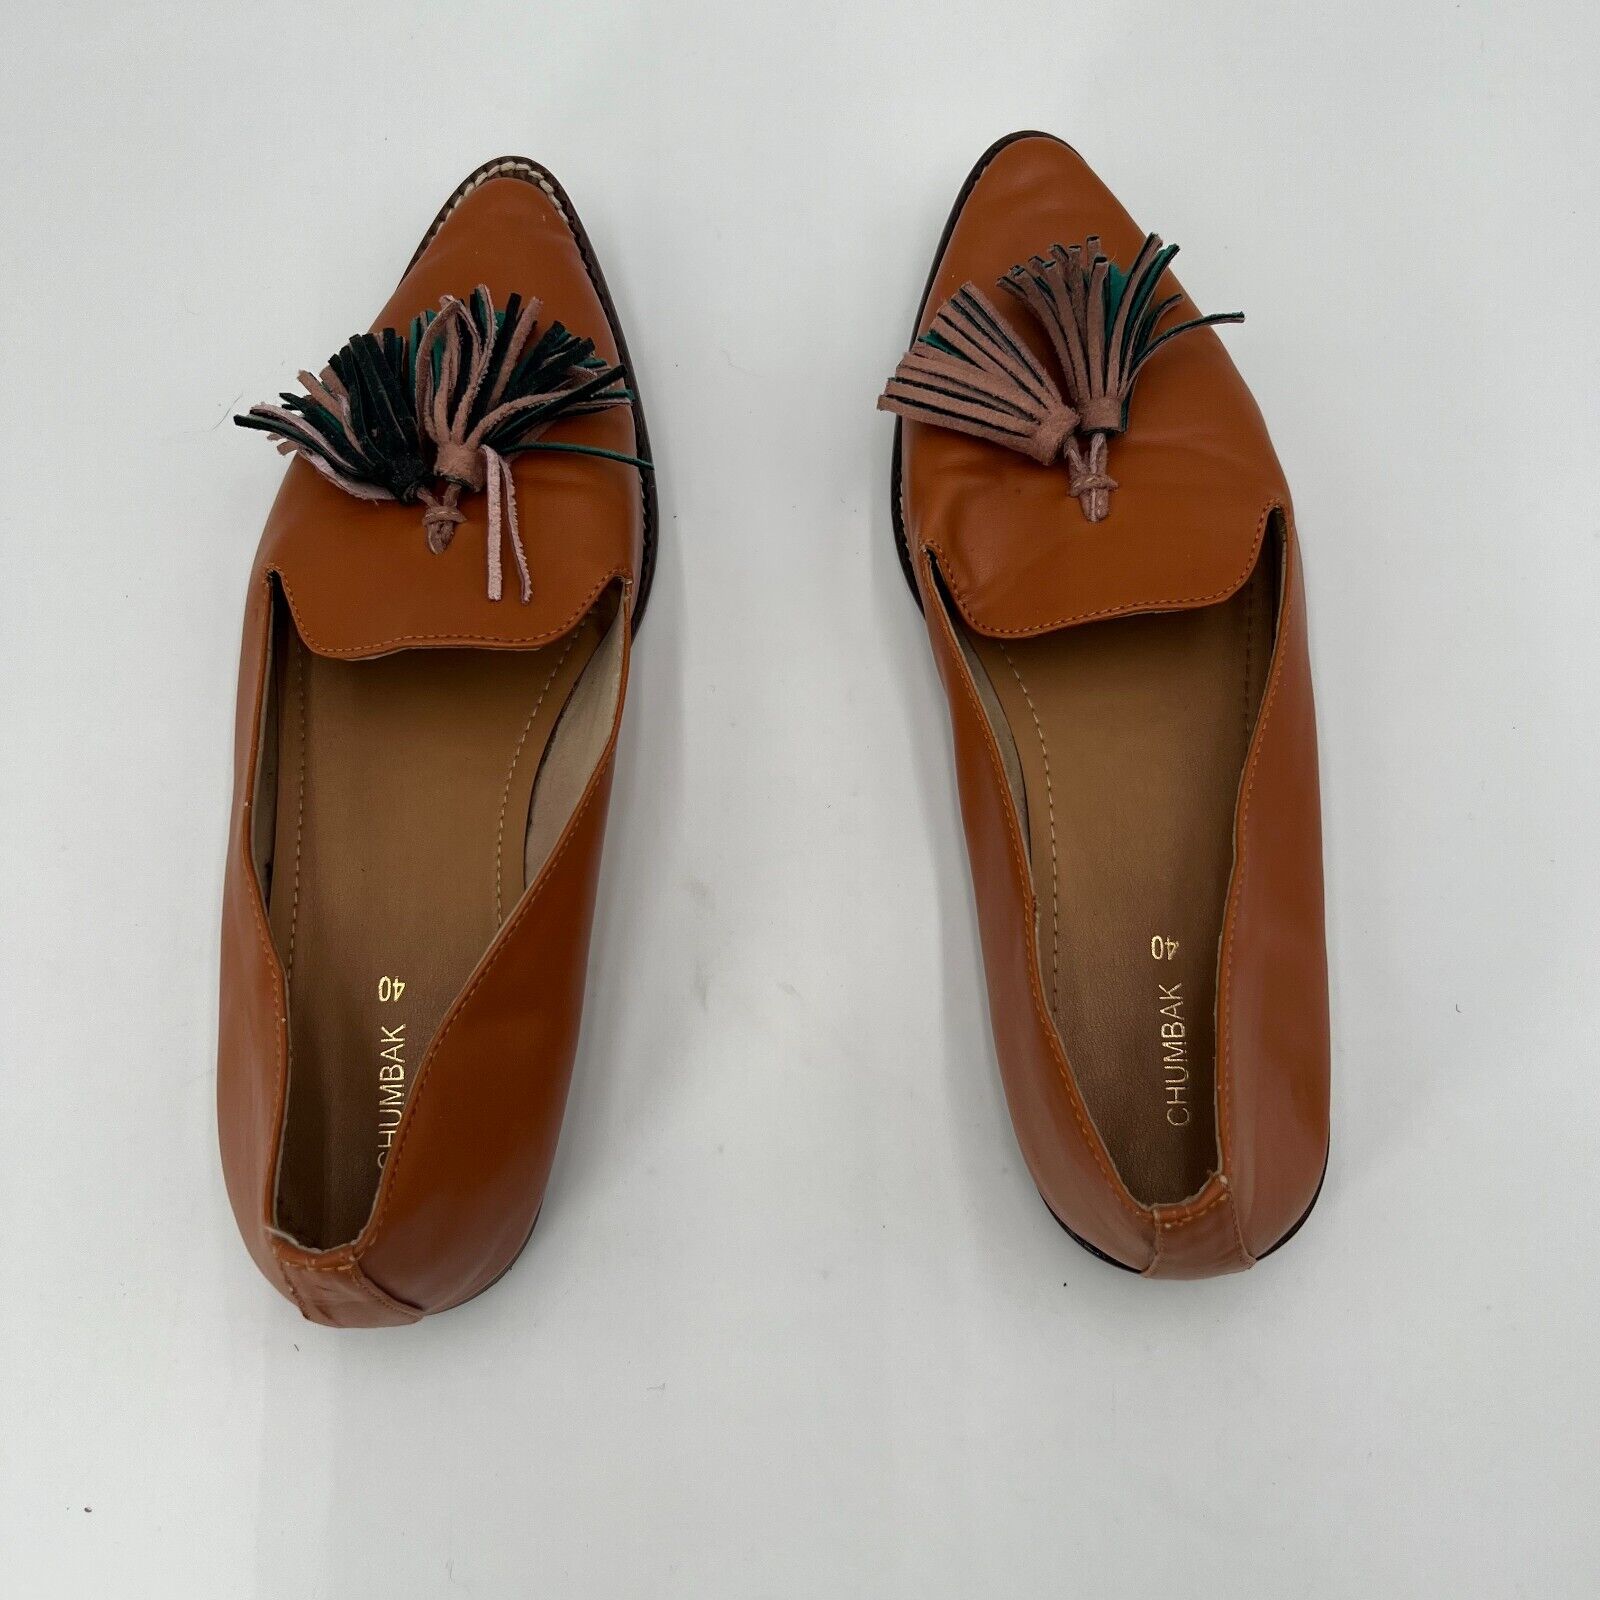 Chumback Slip On Loafer Brown Leather Tassels Flats Pointed Toe Womens Size 9